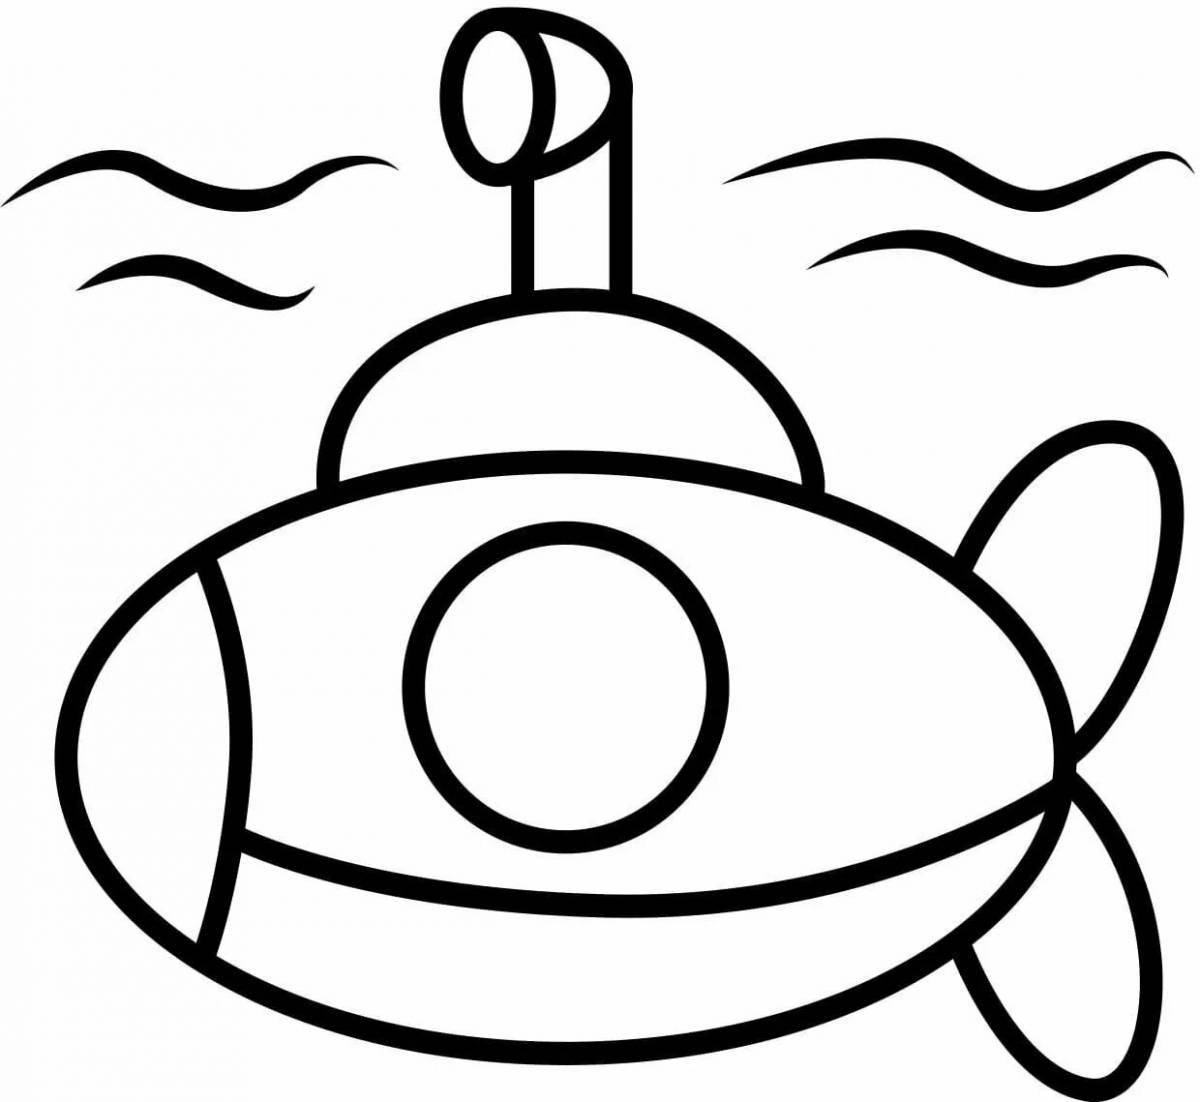 A fun submarine coloring book for 5-6 year olds